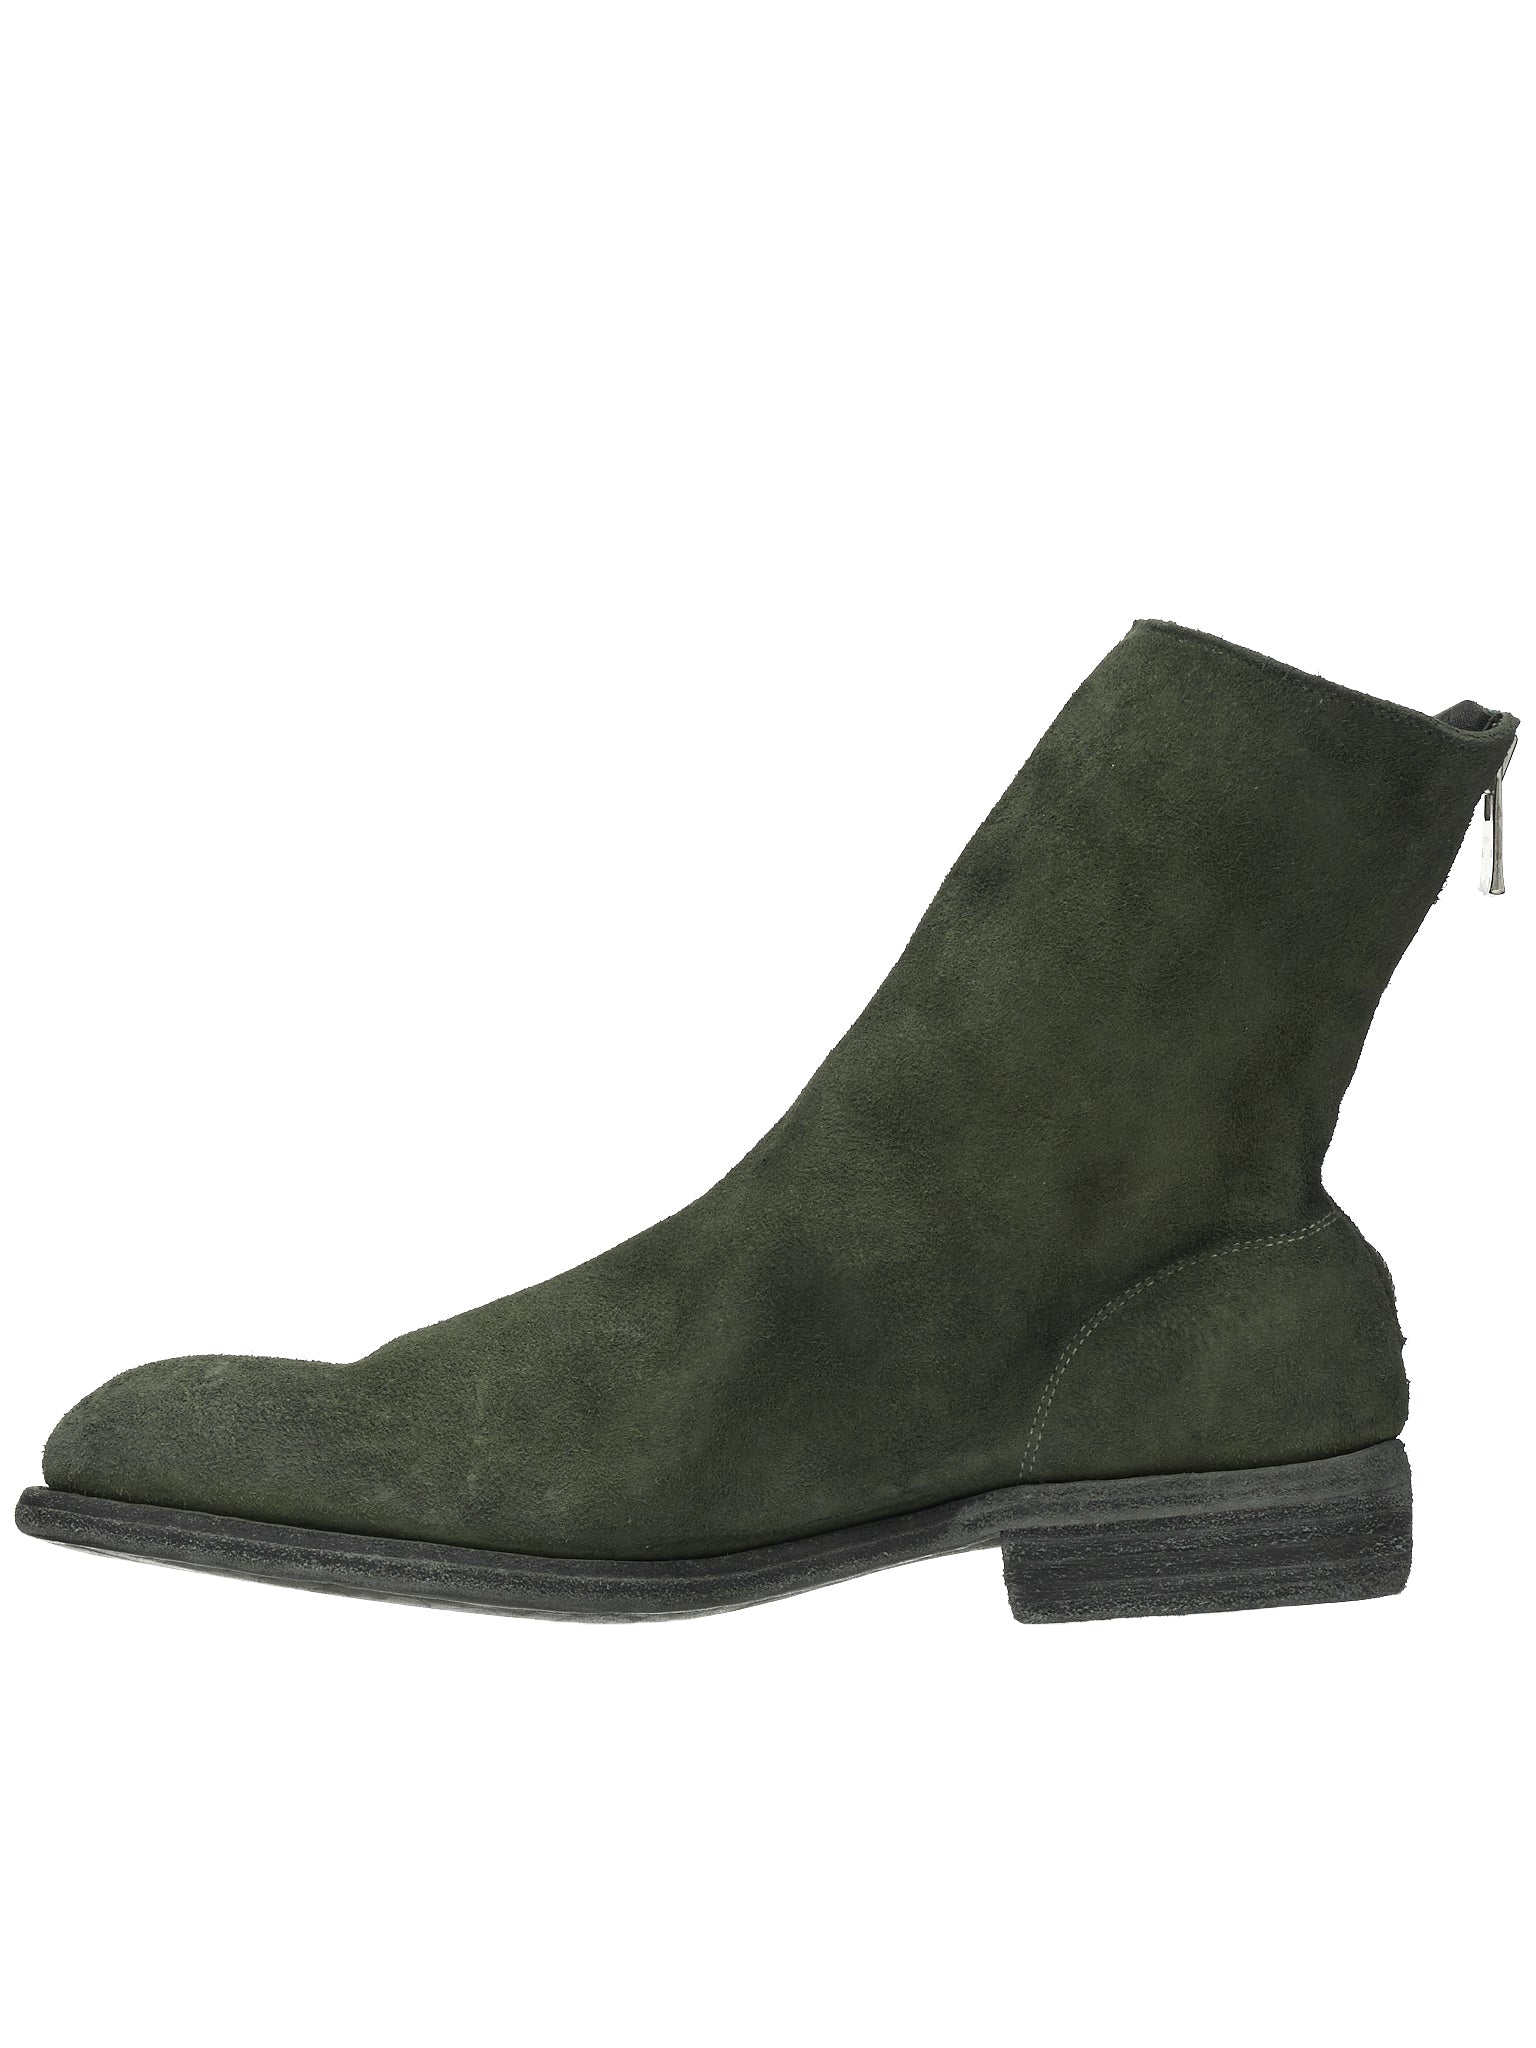 986 Horse Leather Zip Boots (986-HORSE-REVERSE-GREEN)